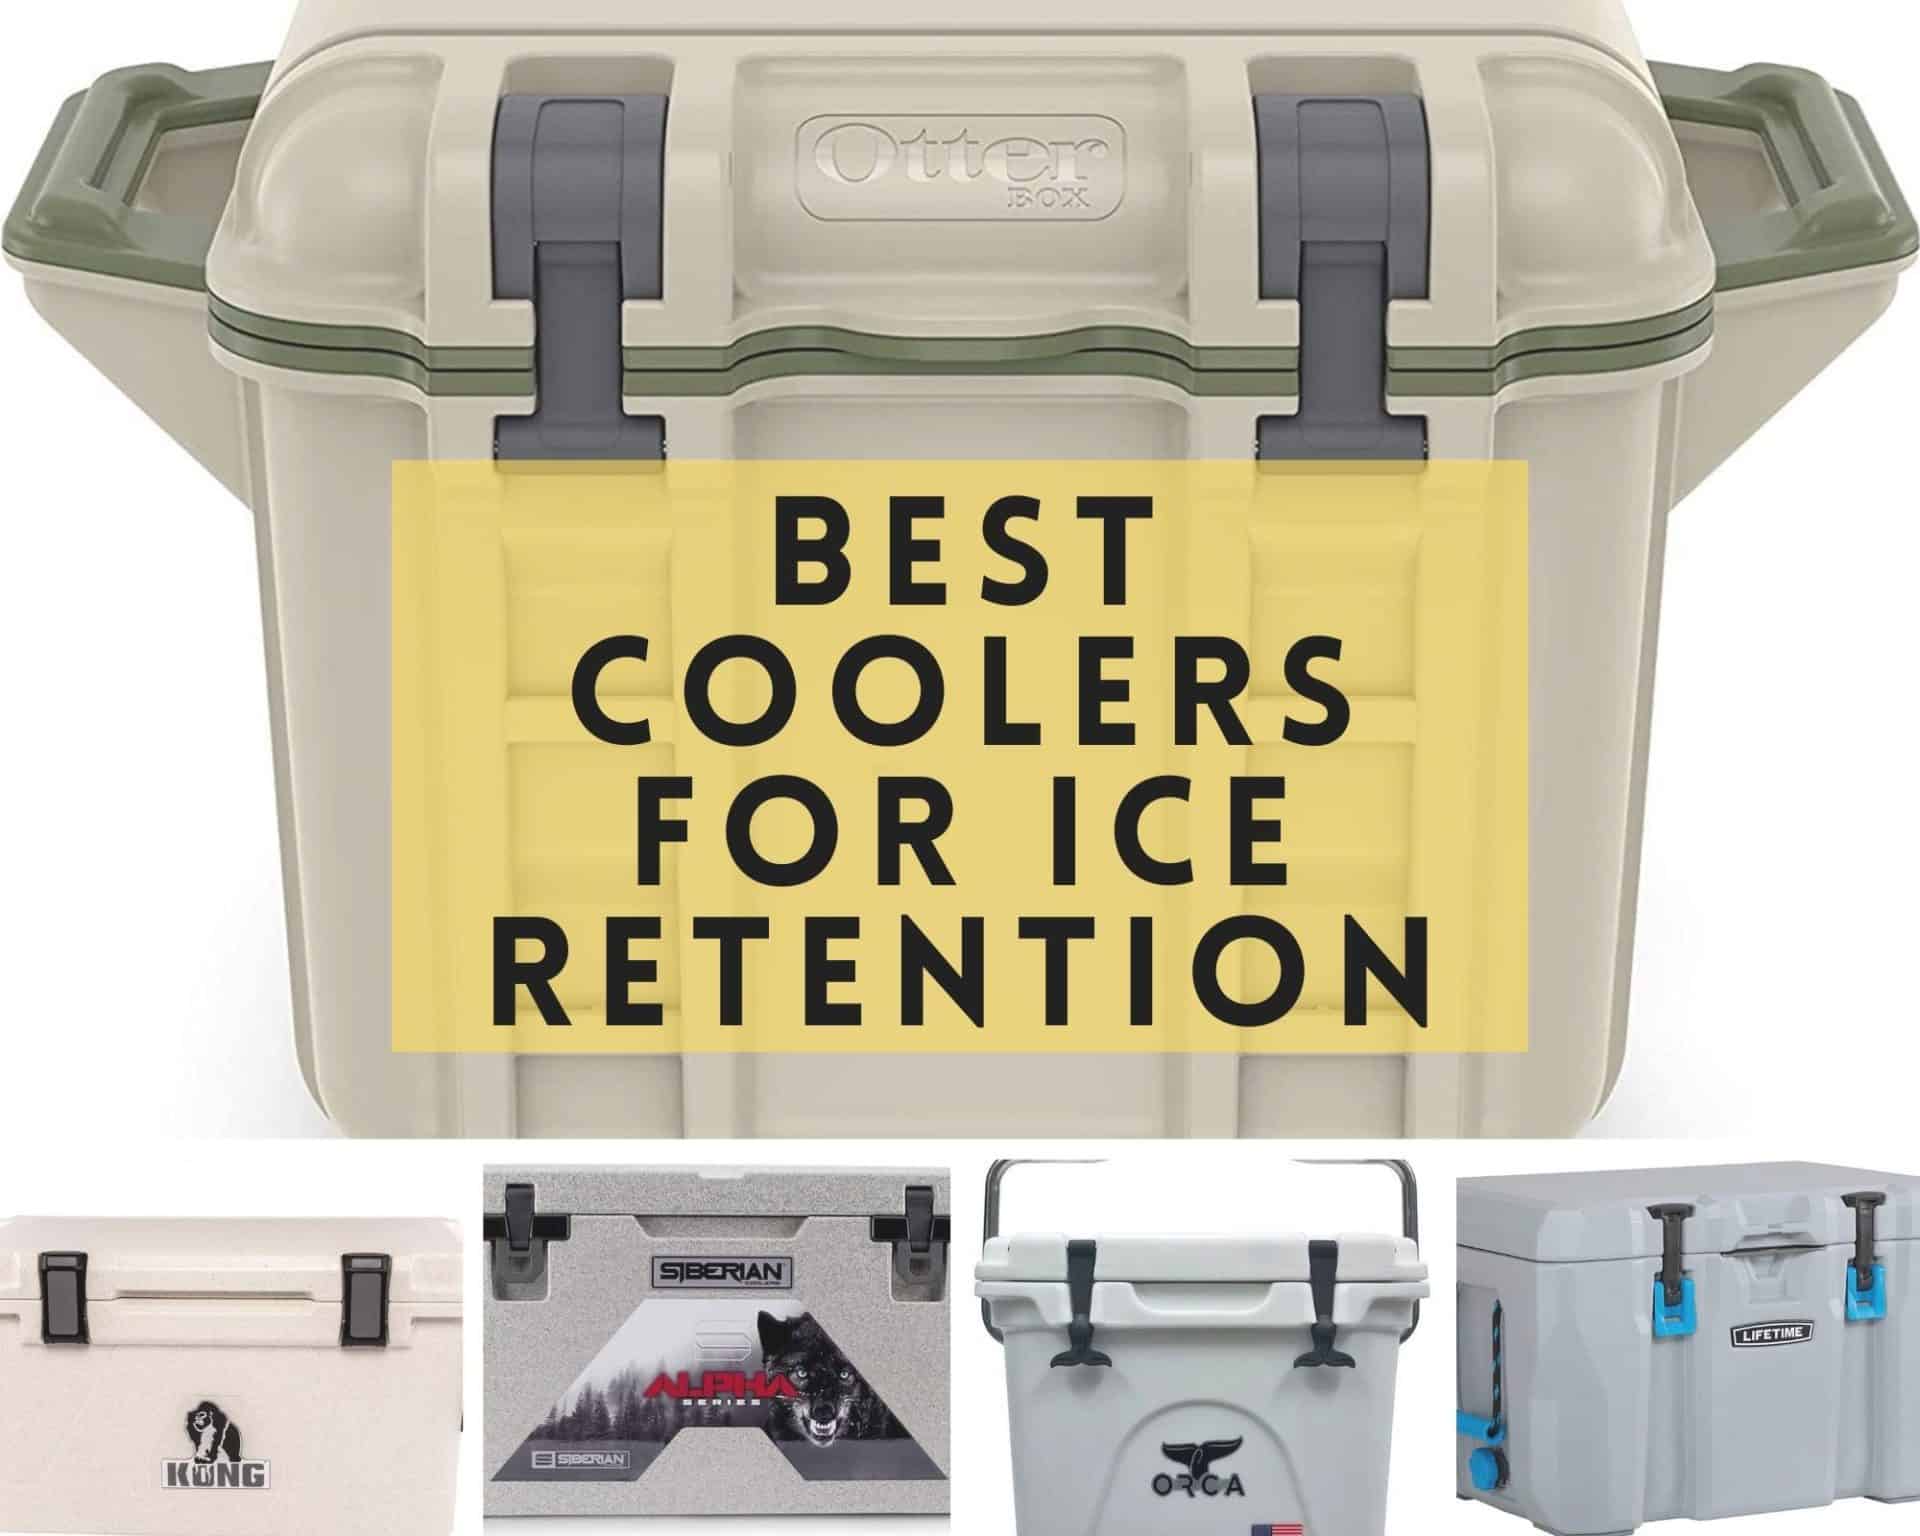 Best Cooler for Ice Retention Reviews What Keeps Ice Longest